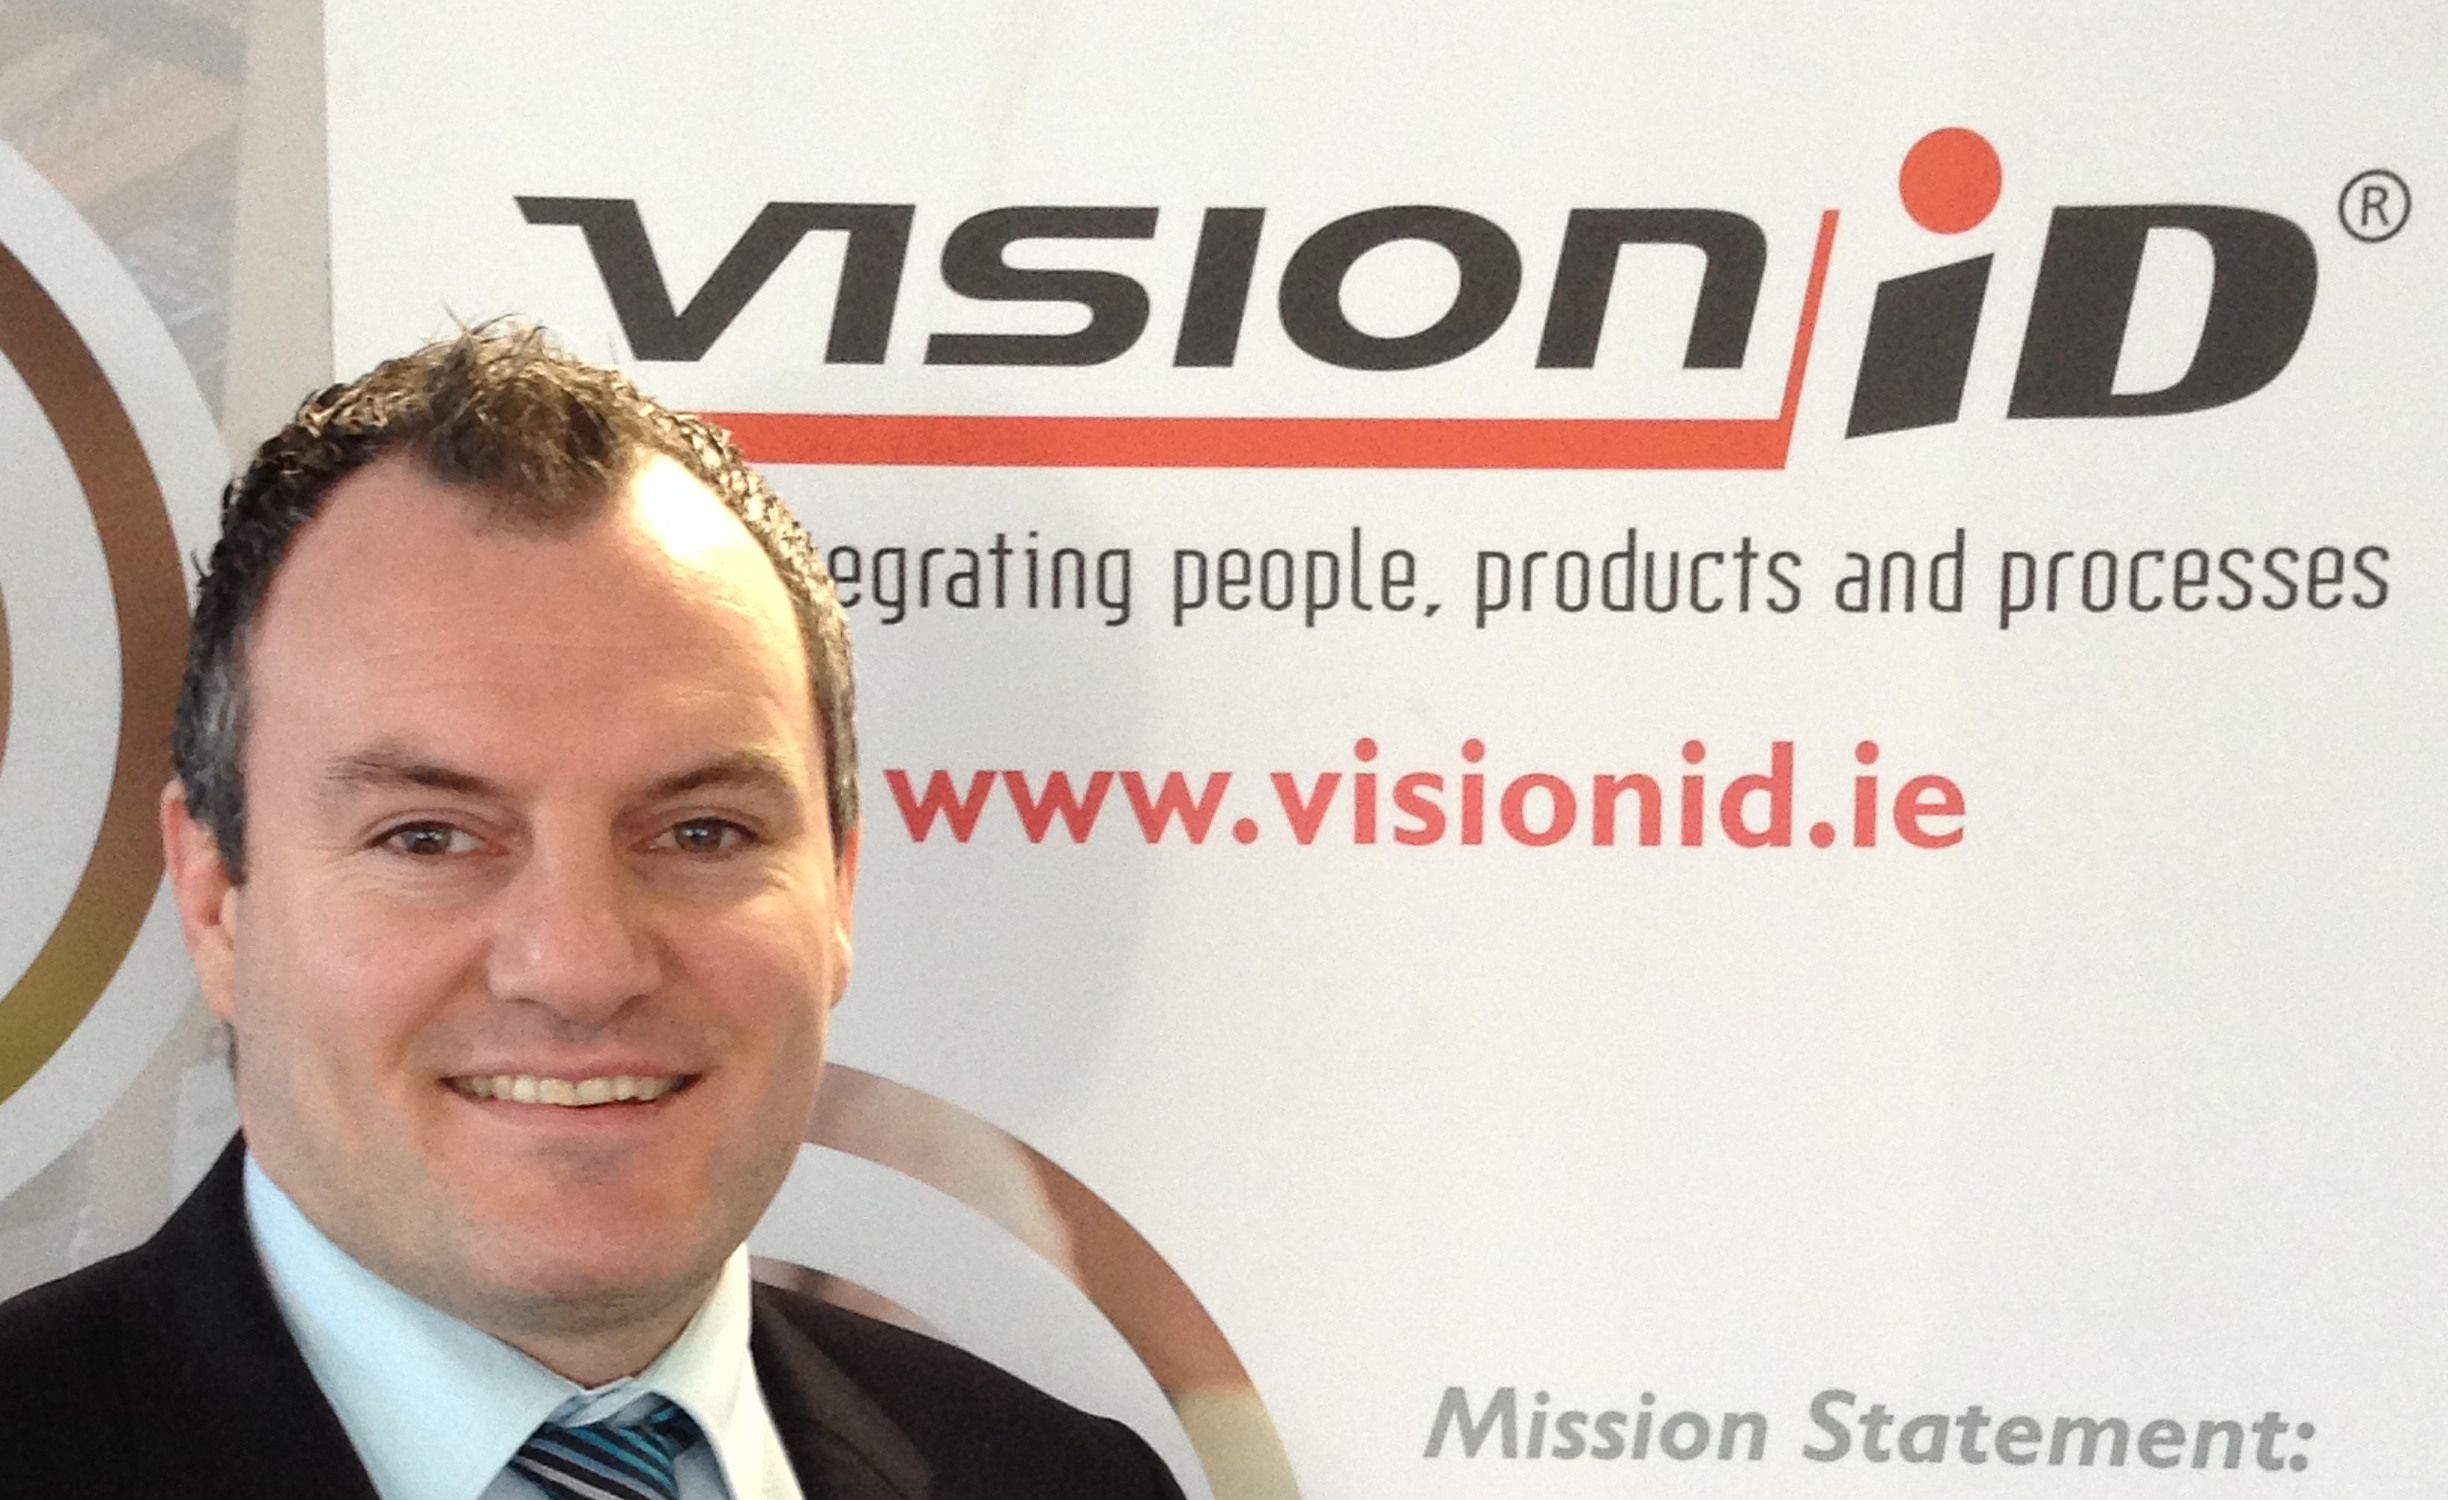 Padraic O’Brien, VisionID’s retail technology solutions manager for Ireland